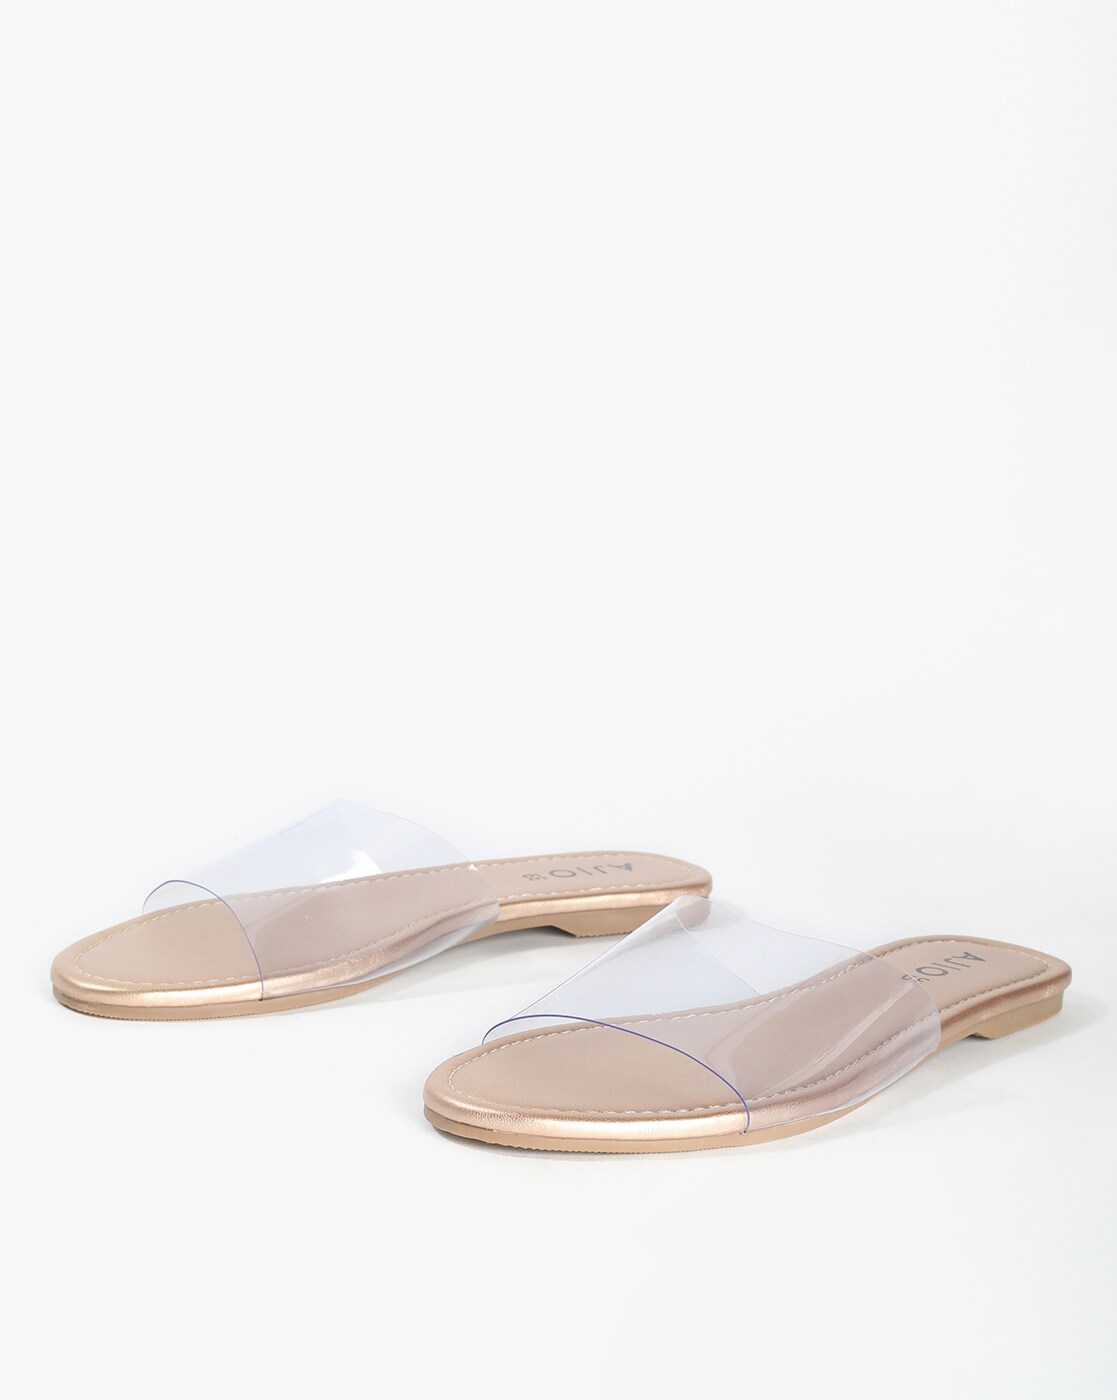 rose gold clear strap point toe barely there sandal